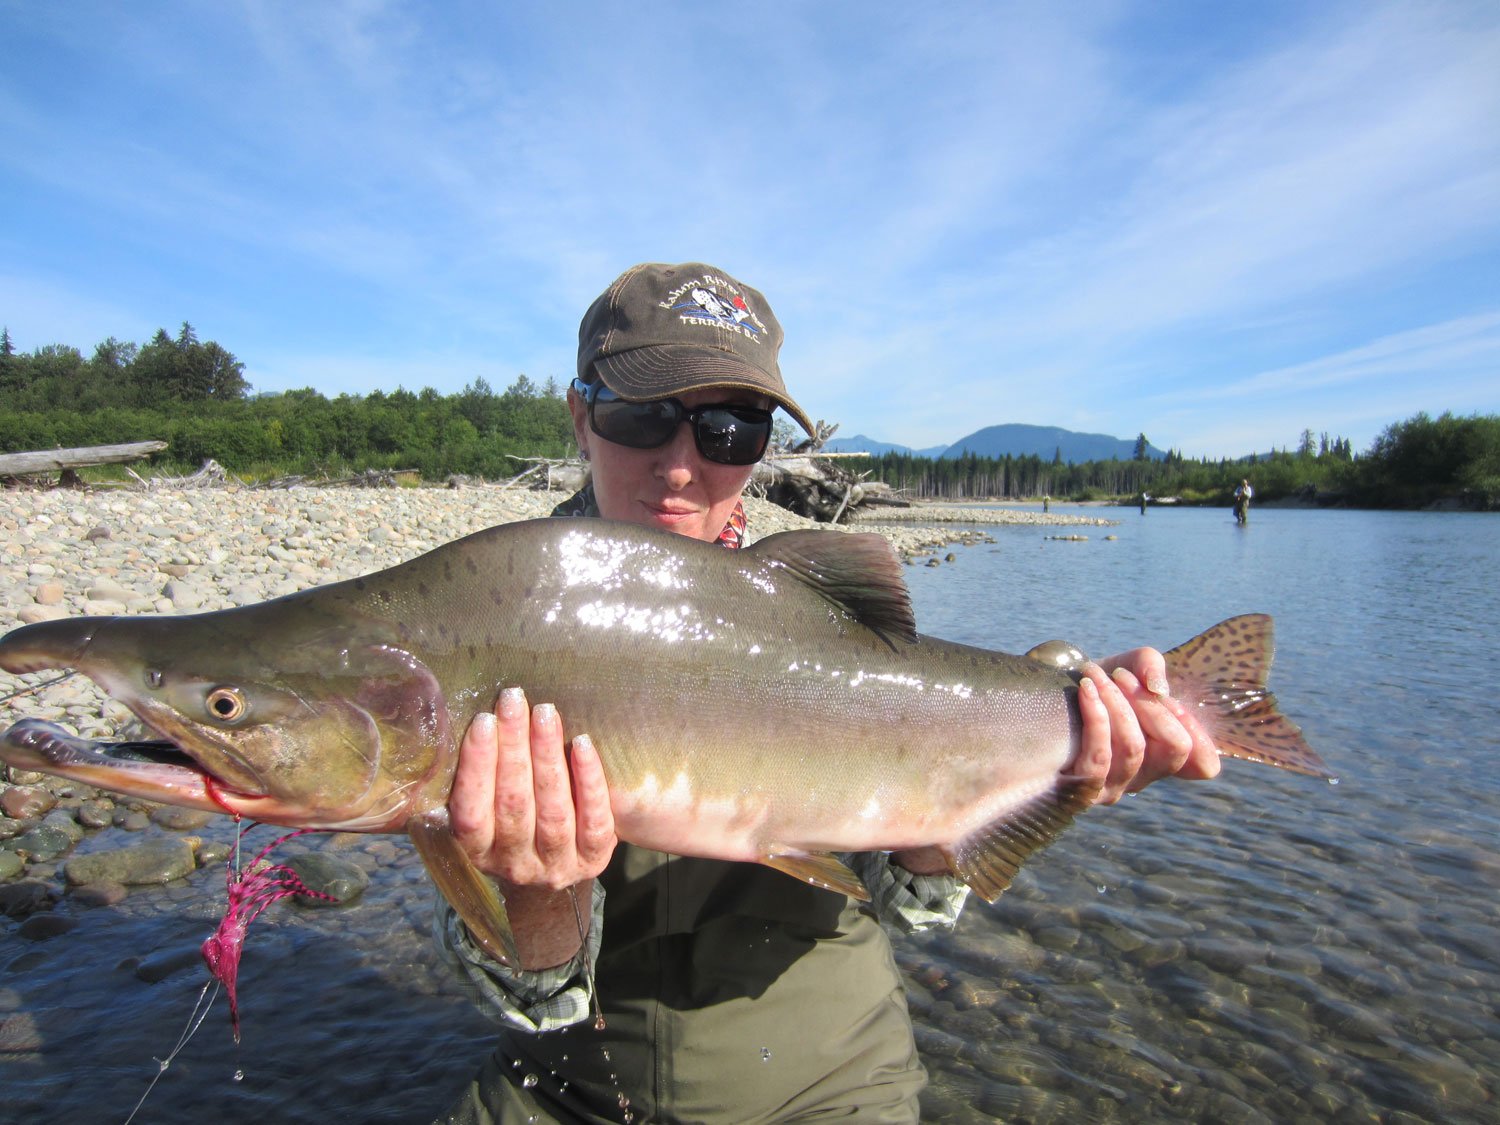 Tracey Buckenham with a large Pink Salmon, notice the pink salmon fly again in the mouth of the fish